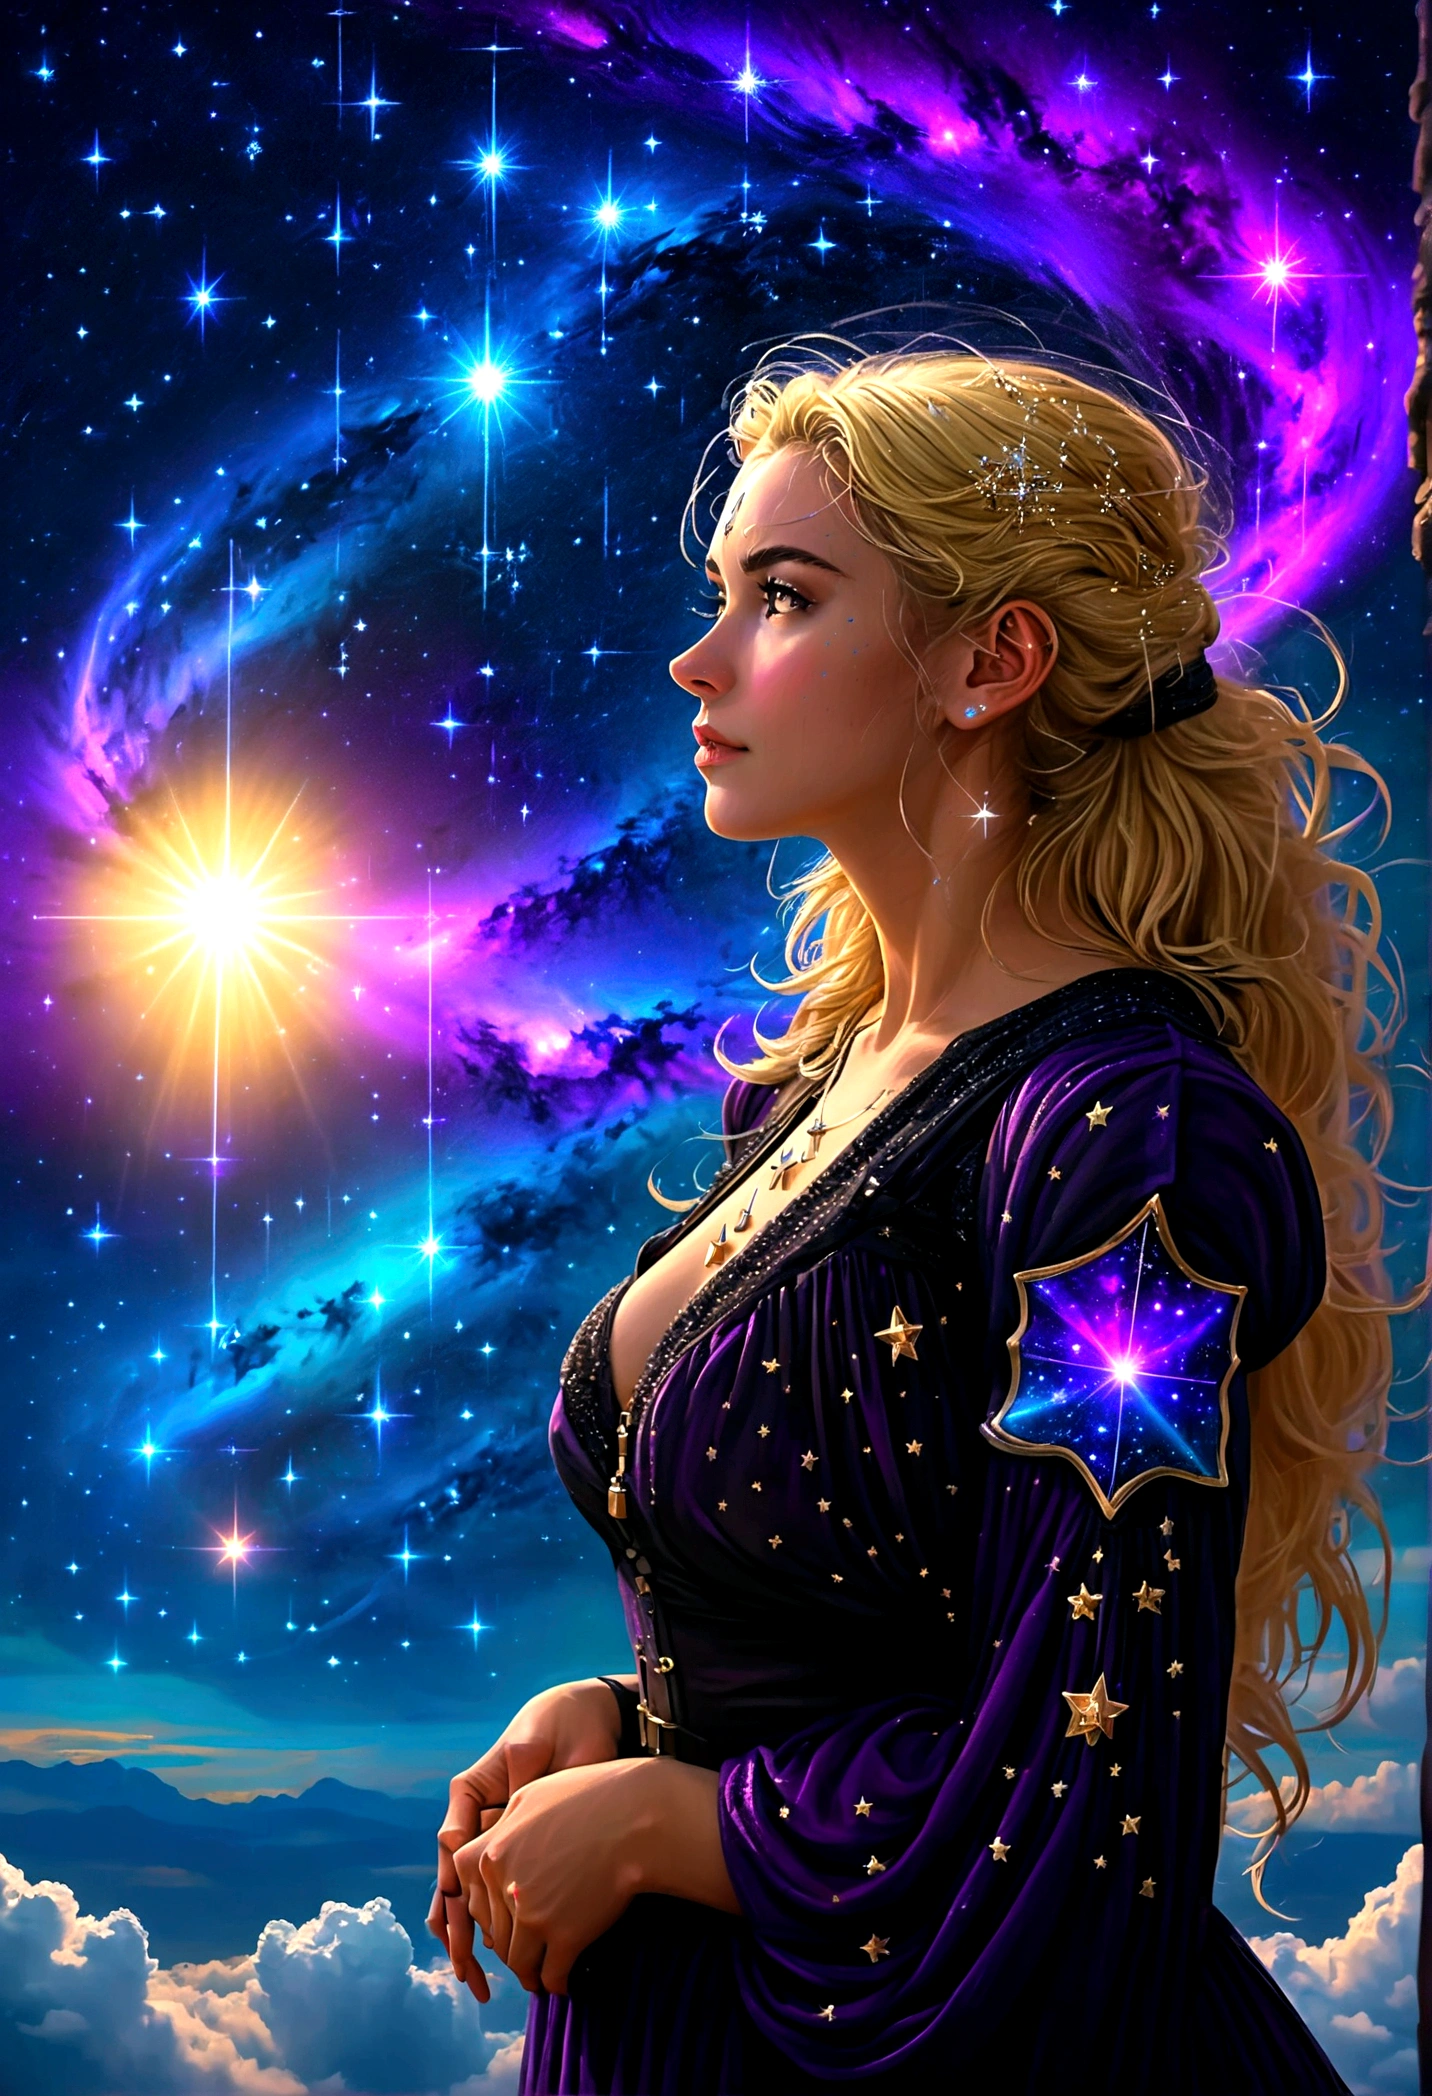 a portrait of an astrologer looking to the sky at libra constellation in the night sky, an extraordinary beautiful woman, there is magic in her eyes divining the future from the Libra constellation, blond hair, dynamic hair style, (best detailed face: 1.5), wearing an intricate dark purple dress decorated with glowing stars, she looks to the night sky seeing the ((Libra constellation in the sky: 1.5)), vibrant, Ultra-high resolution, High Contrast, (masterpiece:1.5), highest quality, Best aesthetics), best details, best quality, highres, 16k, [ultra detailed], masterpiece, best quality, (extremely detailed), Cinematic Hollywood Film, magical sky, 